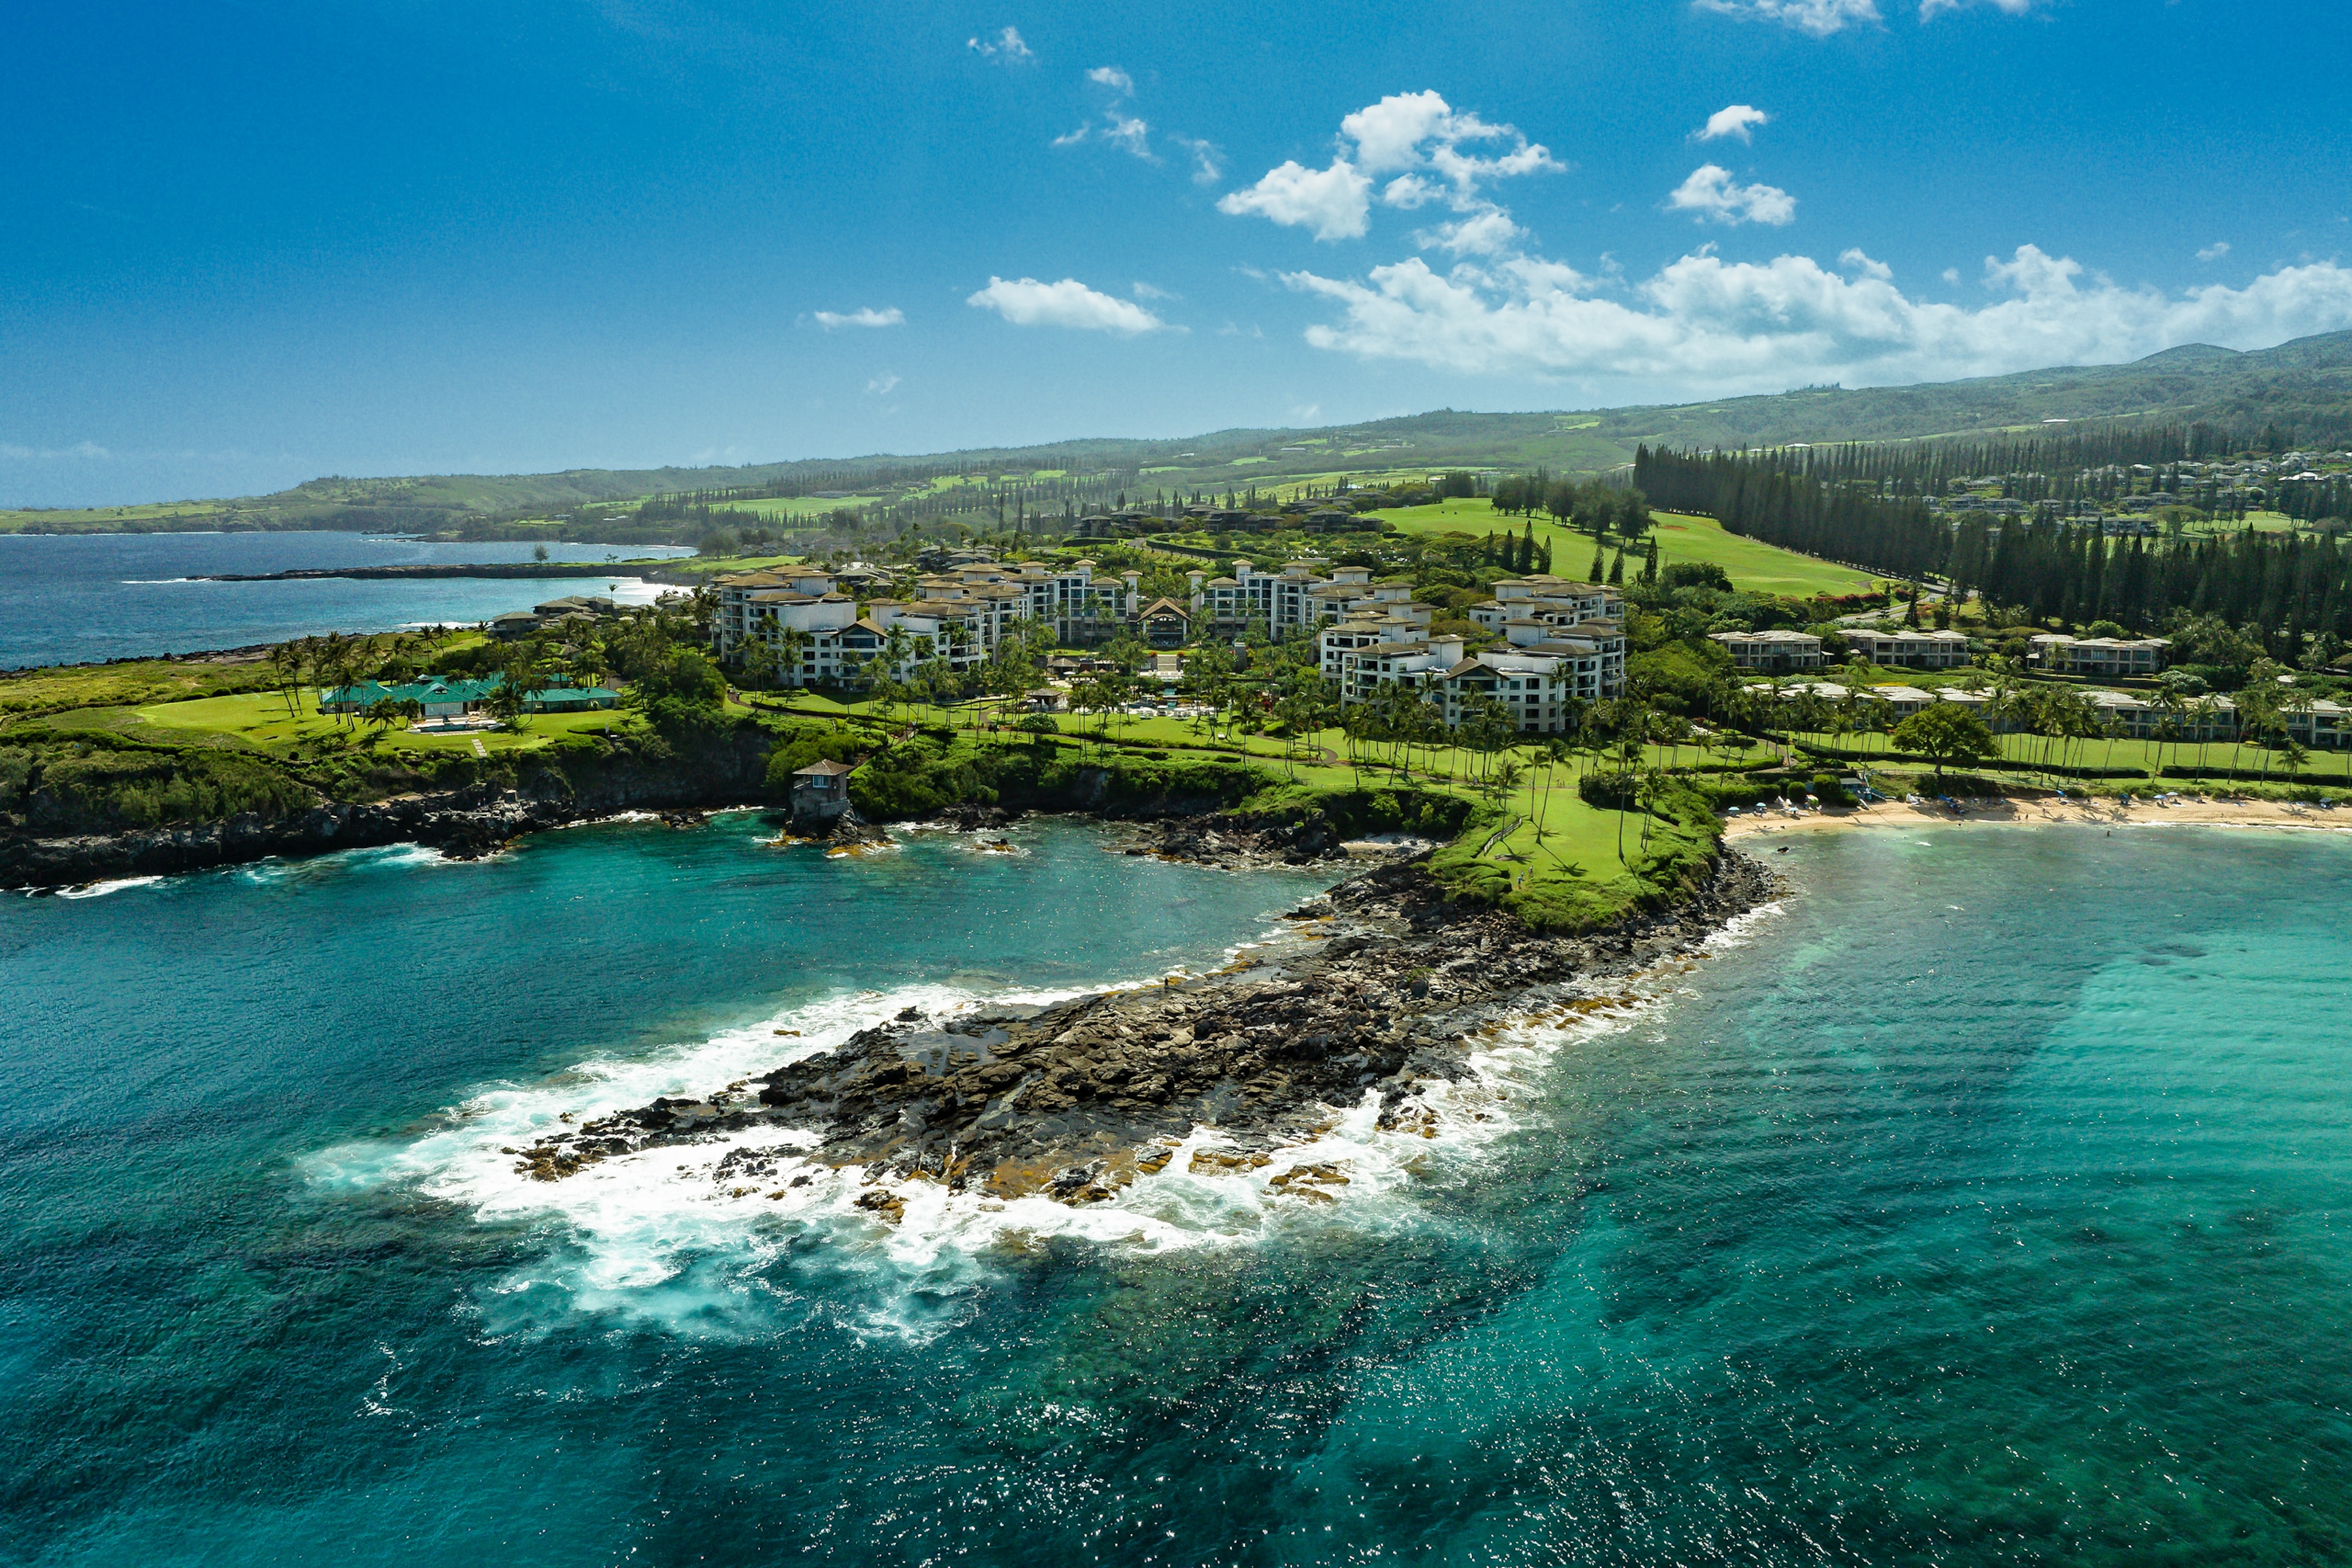 Immaculate Penthouse Unit in Maui's Famed Resort